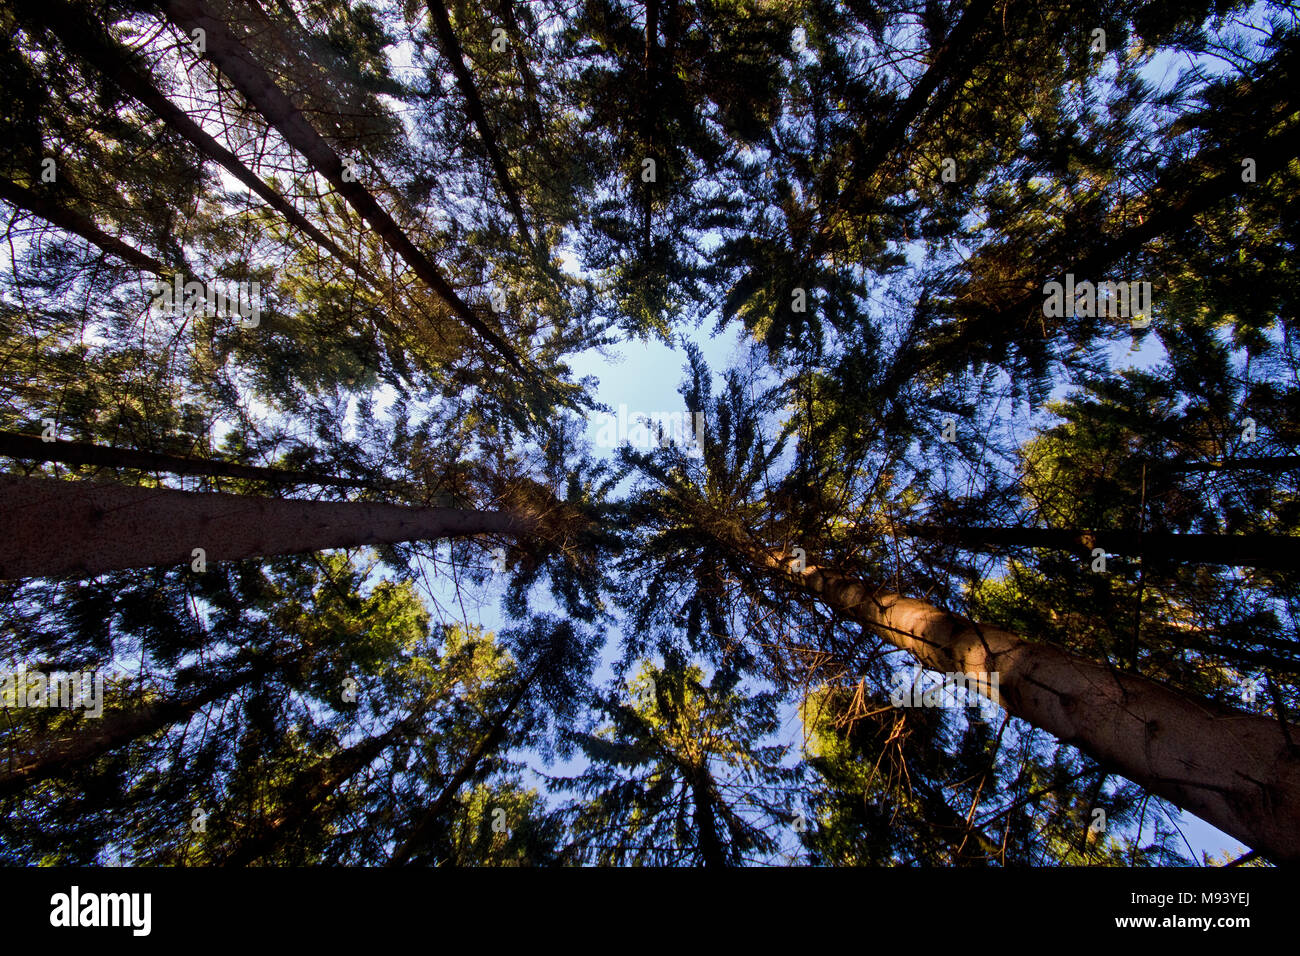 Tall pine trees against a blue sky seen through a wide-angle lens from the forest floor Stock Photo